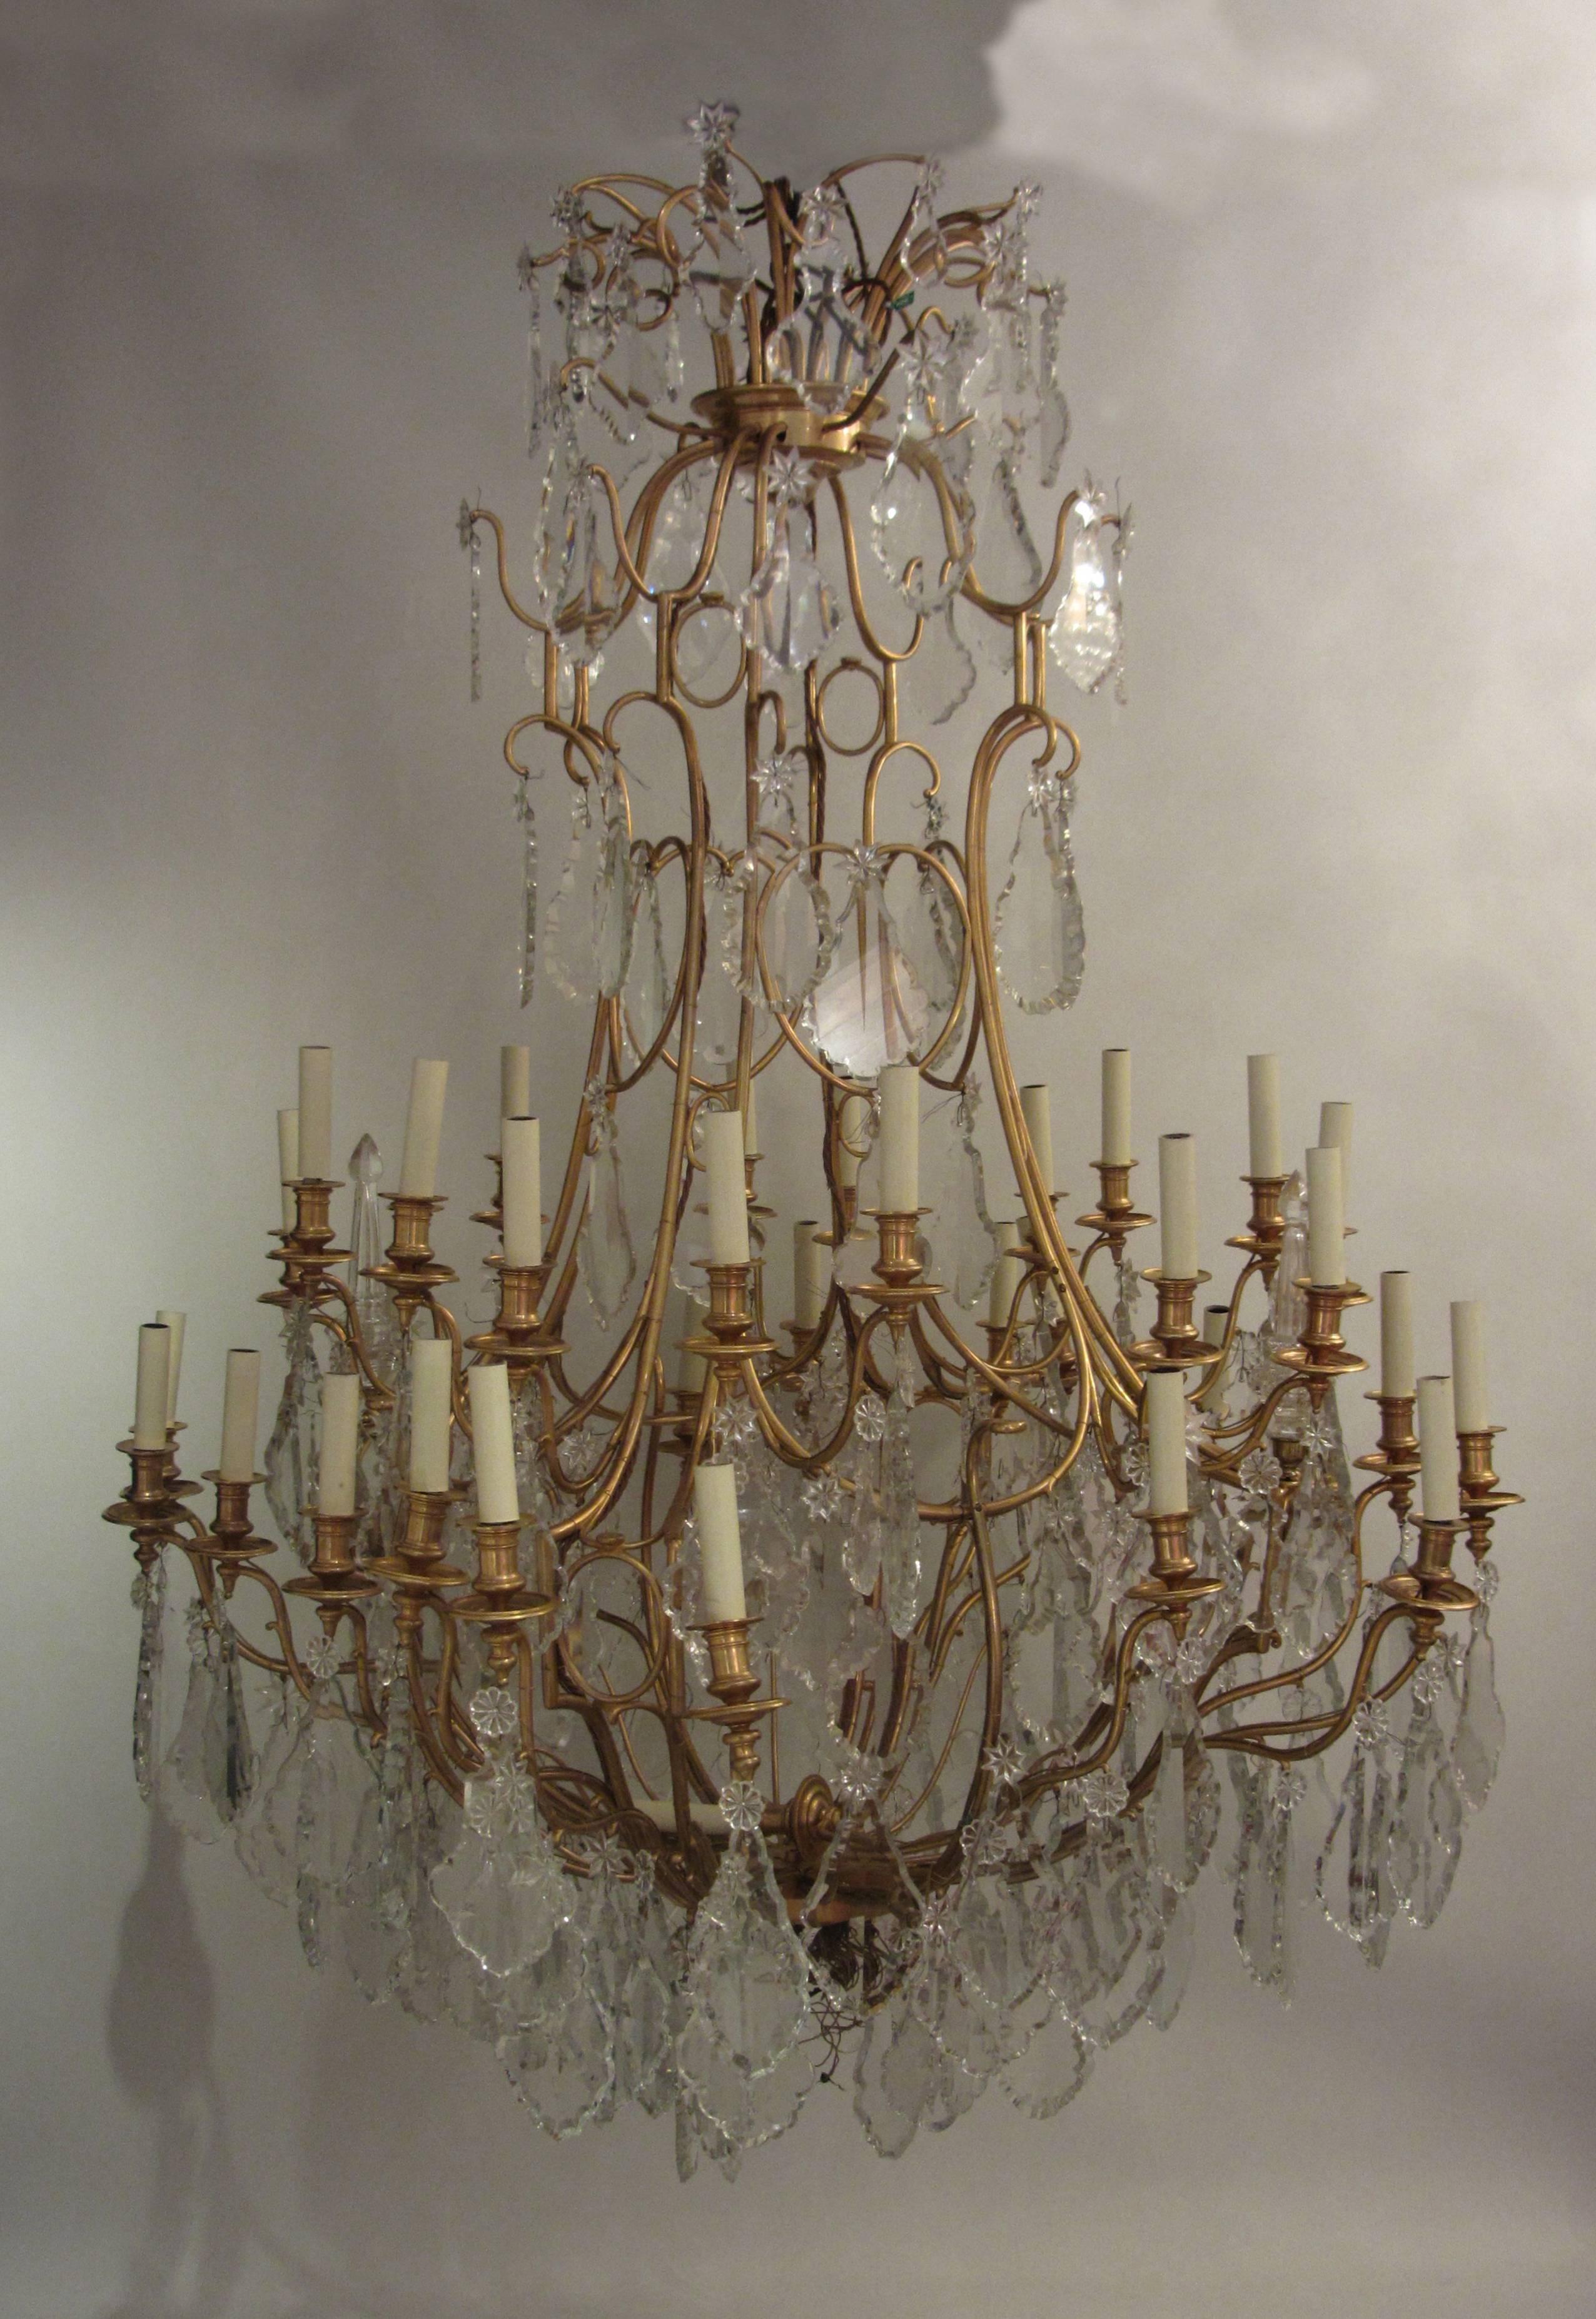 A large-scale, important 19th century Baccarat gilt bronze thirty light chandelier. The bird cage style frame is a Baccarat beautiful decorative design, gold-plated with 22-carat gold and adorned with large excellent quality cut-glass plaques and